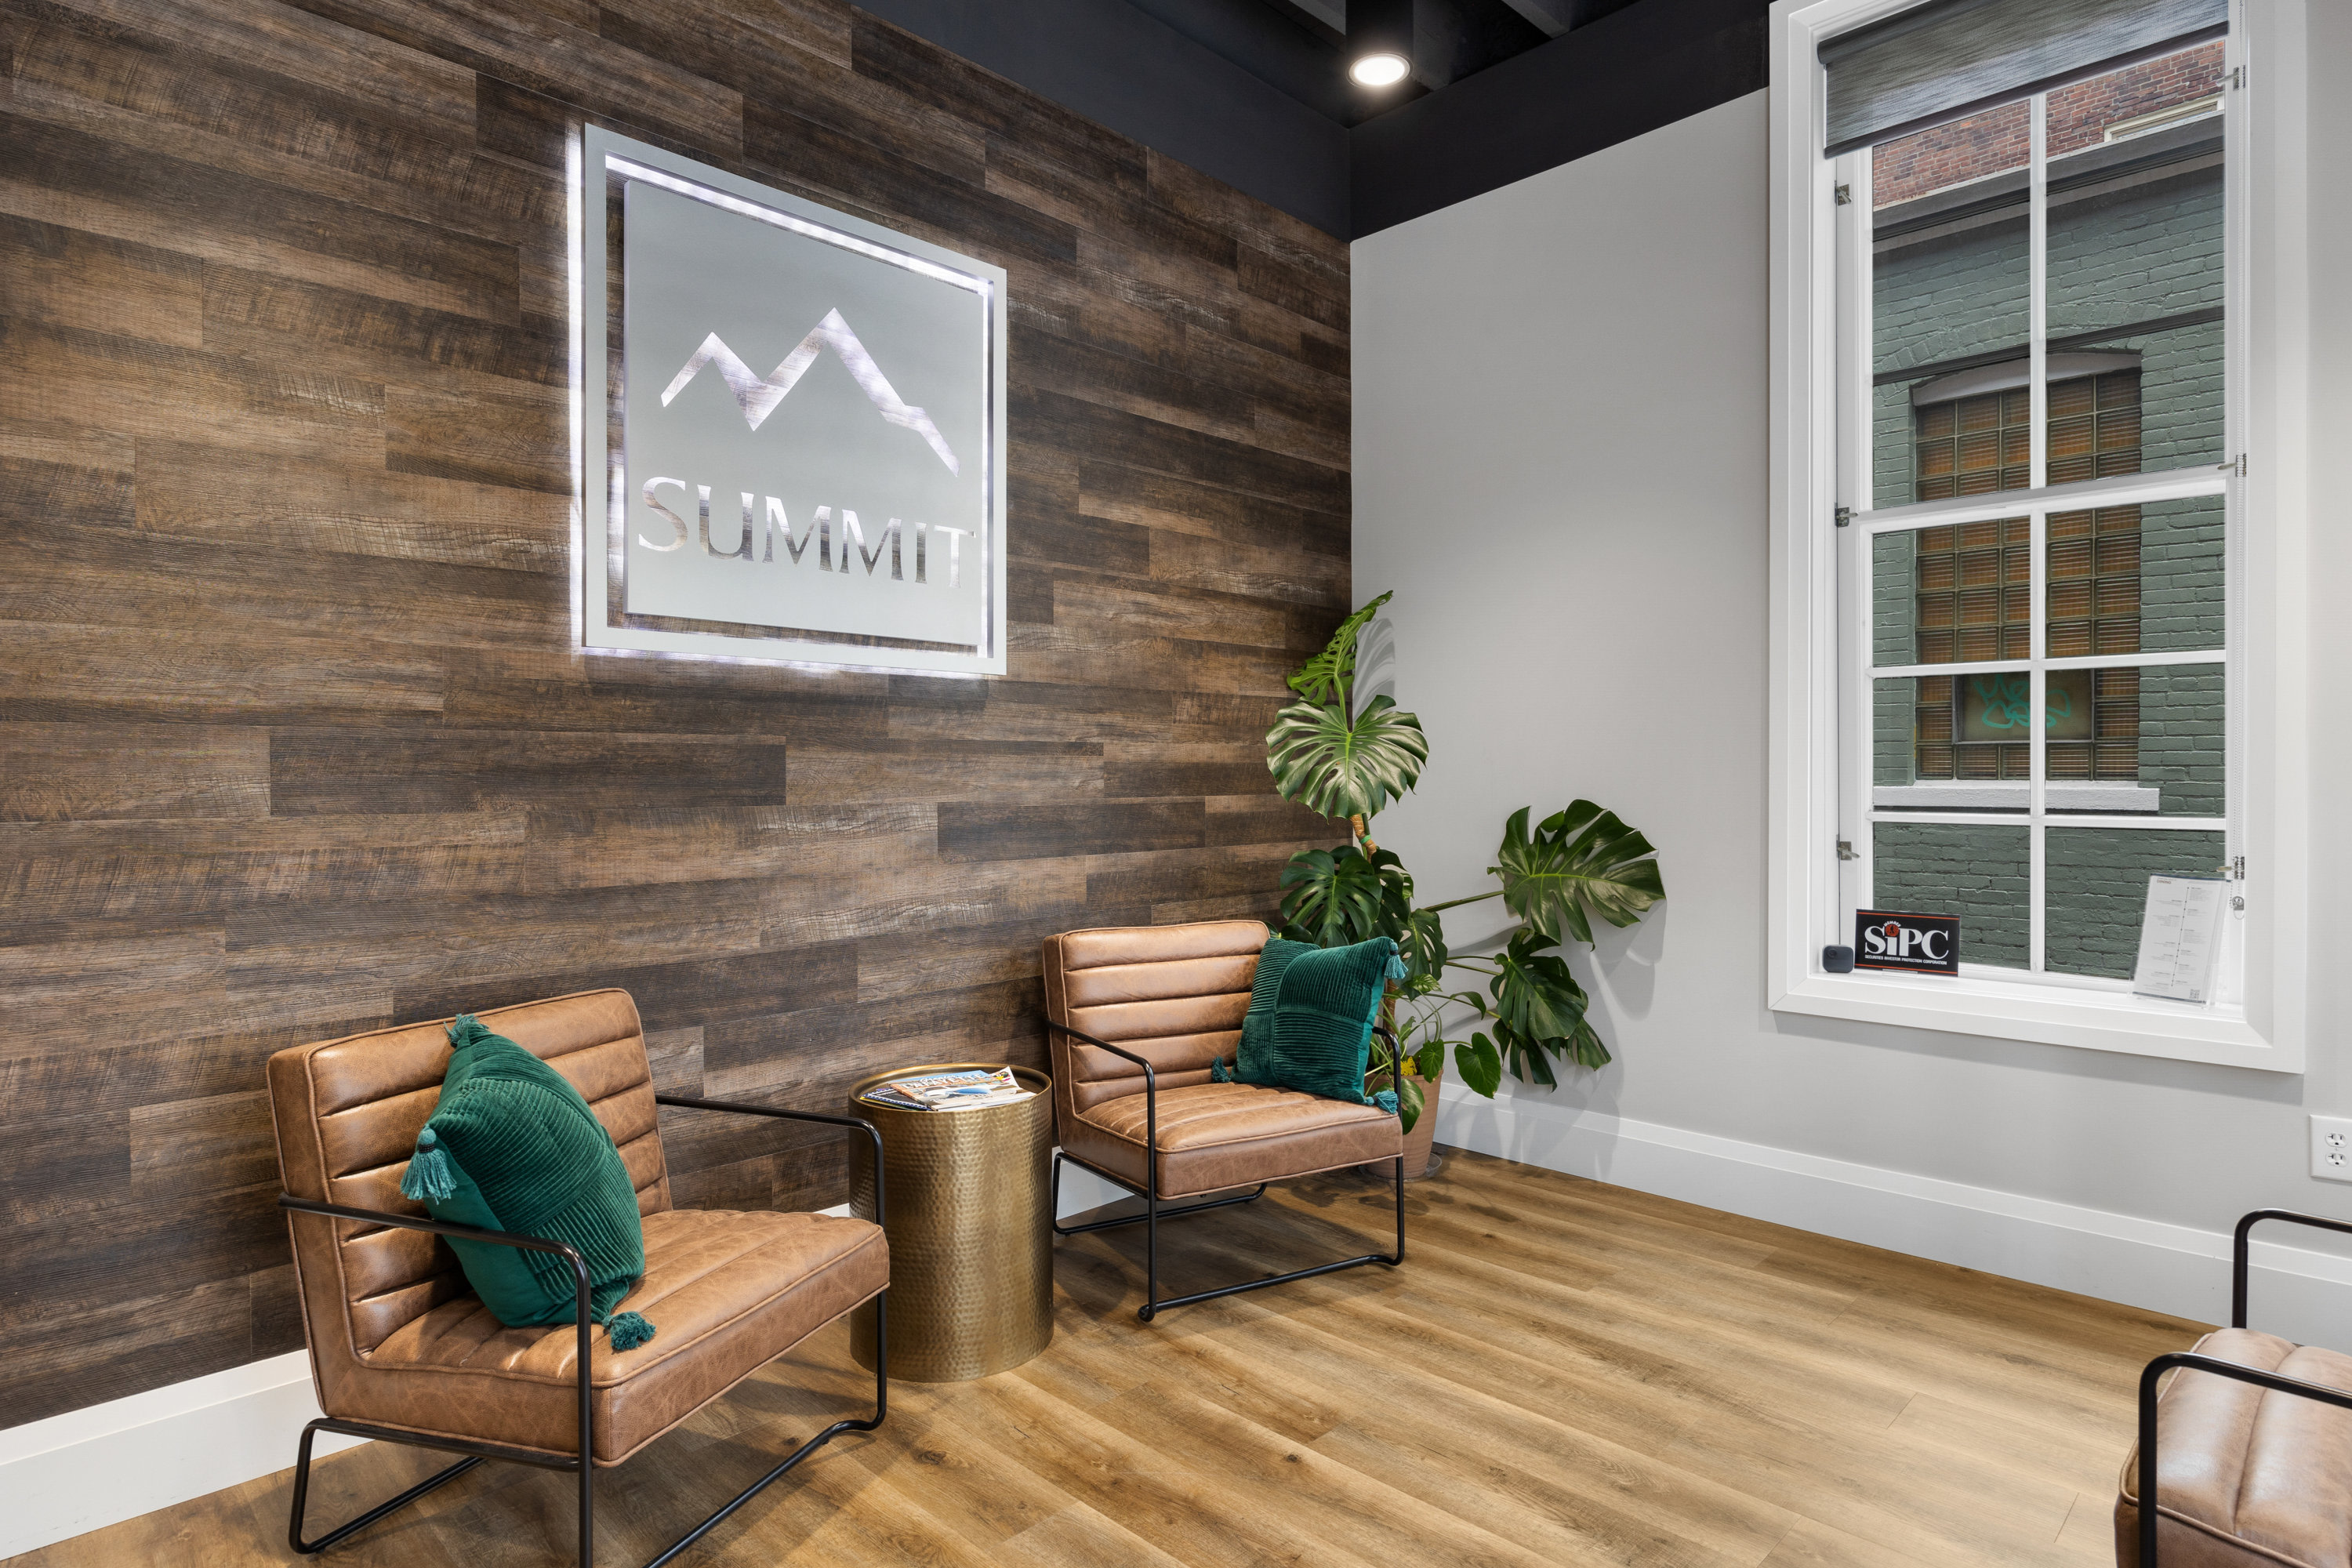 Lobby area with brown leather chairs, green pillows, a wooden accent wall with the Summit logo, and a large window.